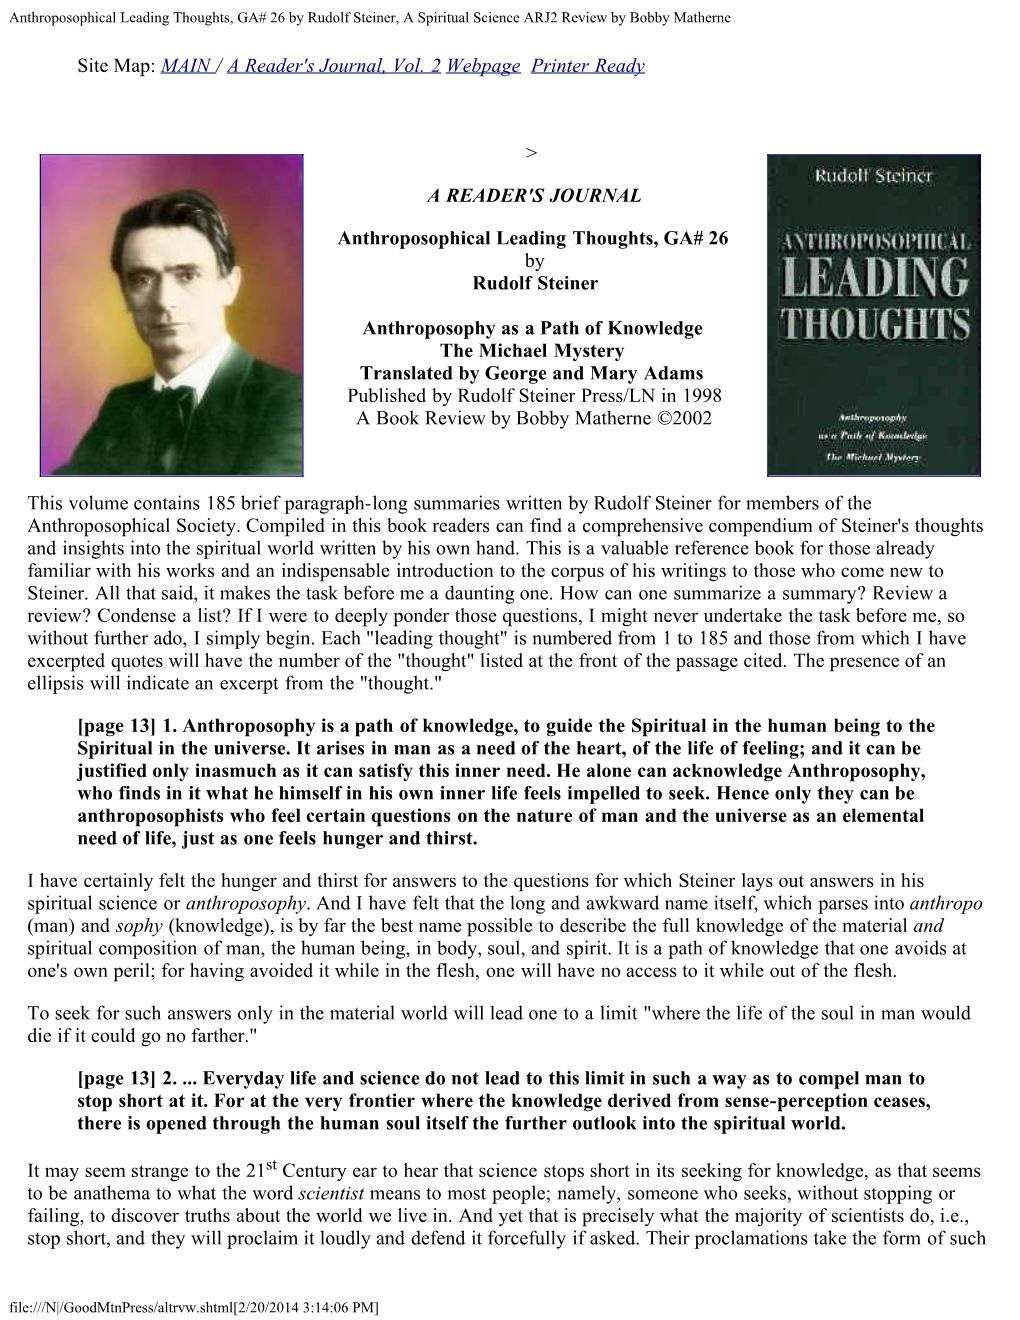 Anthroposophical Leading Thoughts, GA# 26 by Rudolf Steiner, a Spiritual Science ARJ2 Review by Bobby Matherne